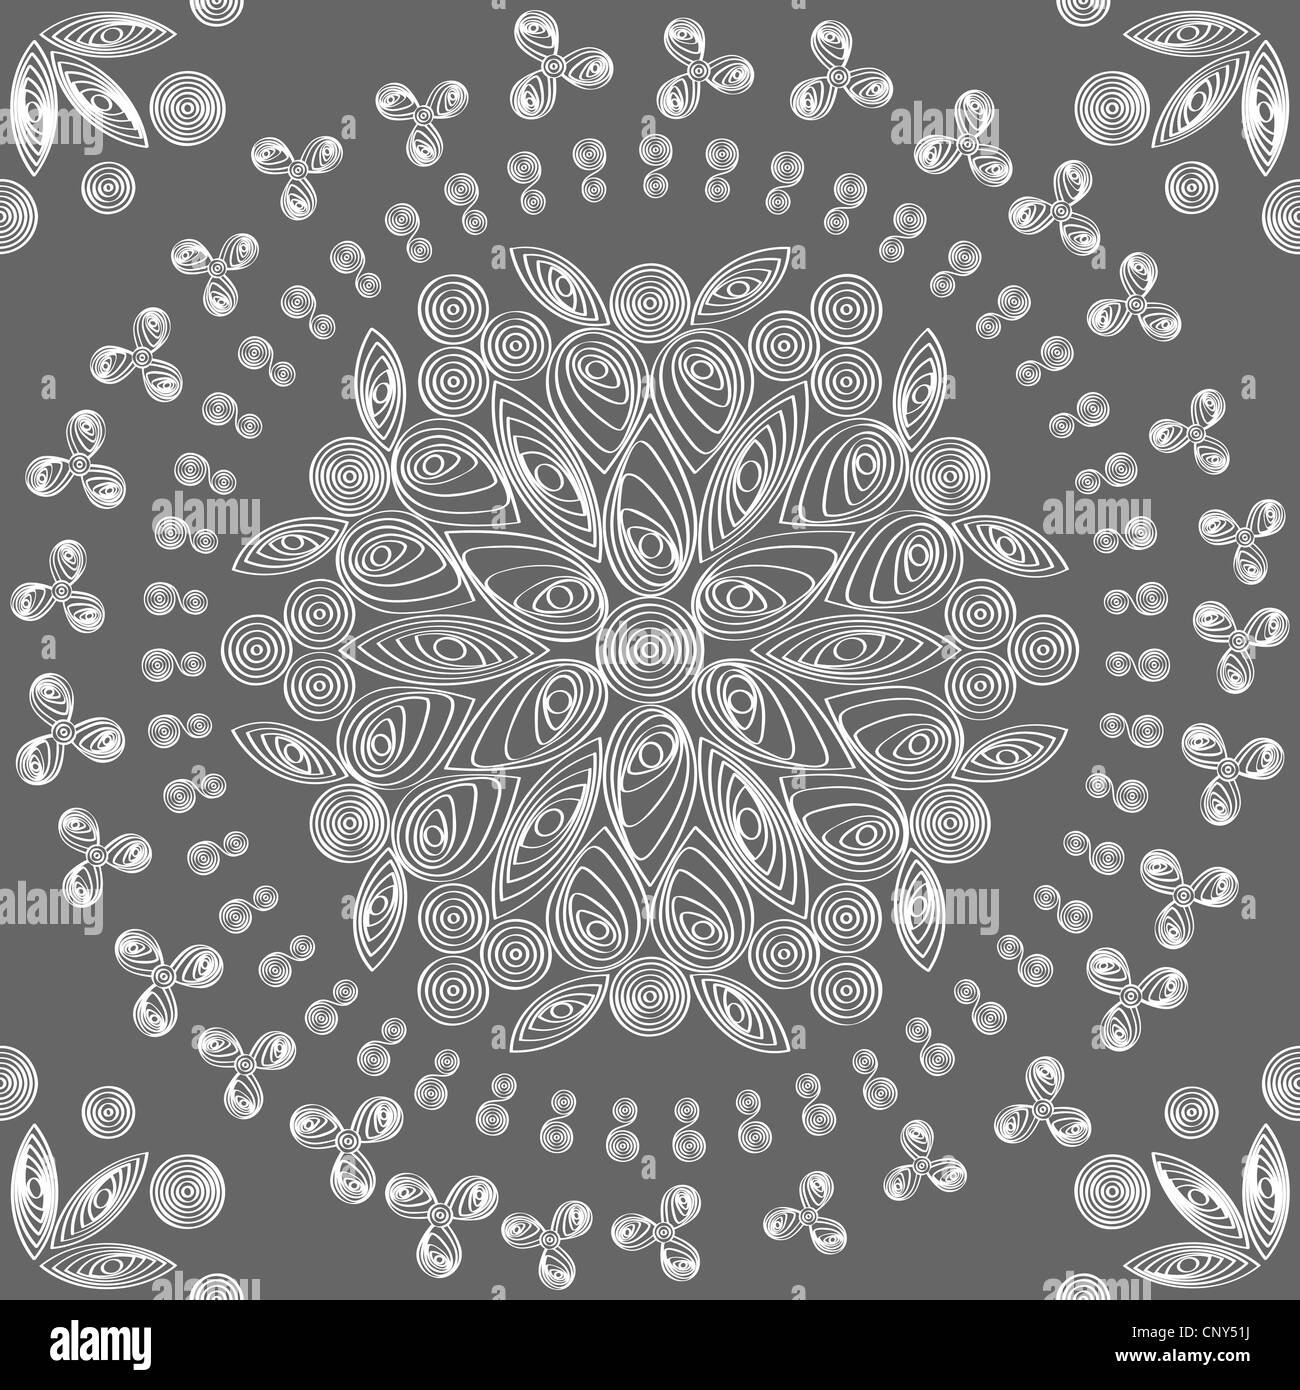 an exquisite floral lace seamless white lacy pattern on a gray background Stock Photo